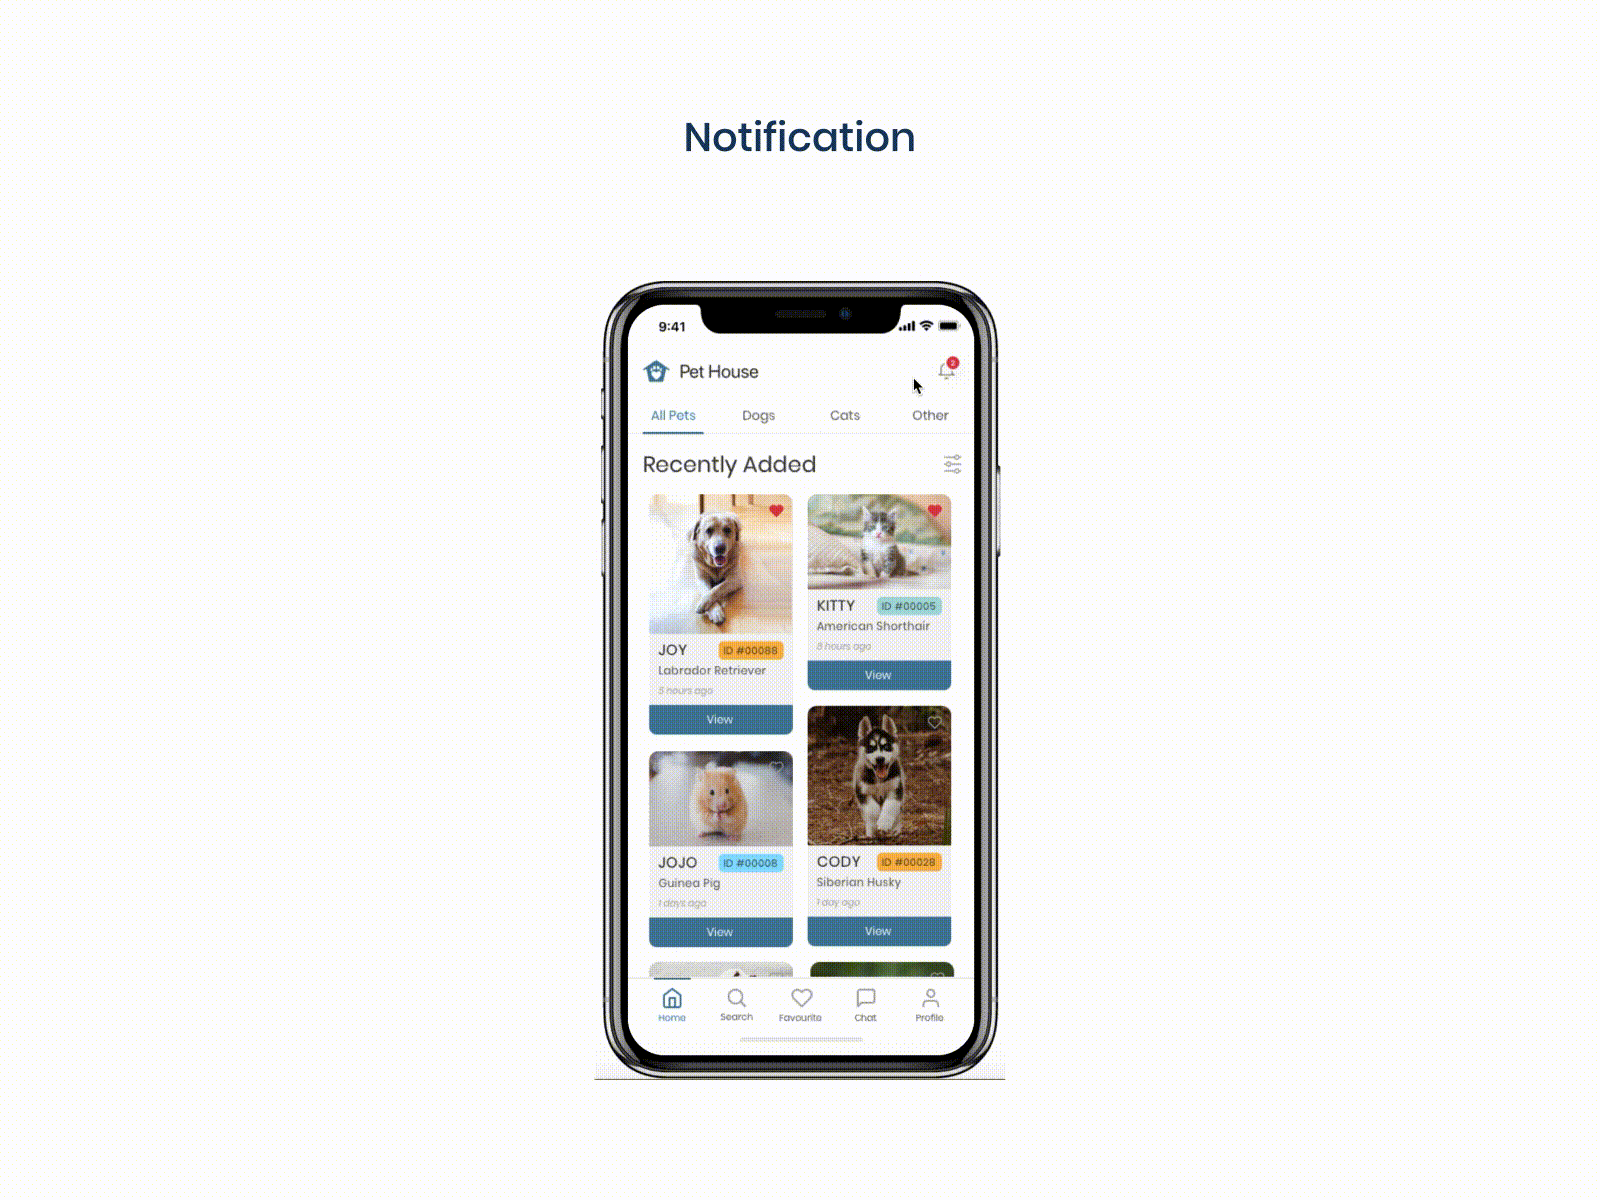 Notification - Pet House - Mobile App UI aftereffects alerts mobile ui mobileappdesign motion design notification ui uiinspiration uiuxdesign uiuxdesigner user experience user interface design userexperience userexperiencedesign userinterface uxinspiration